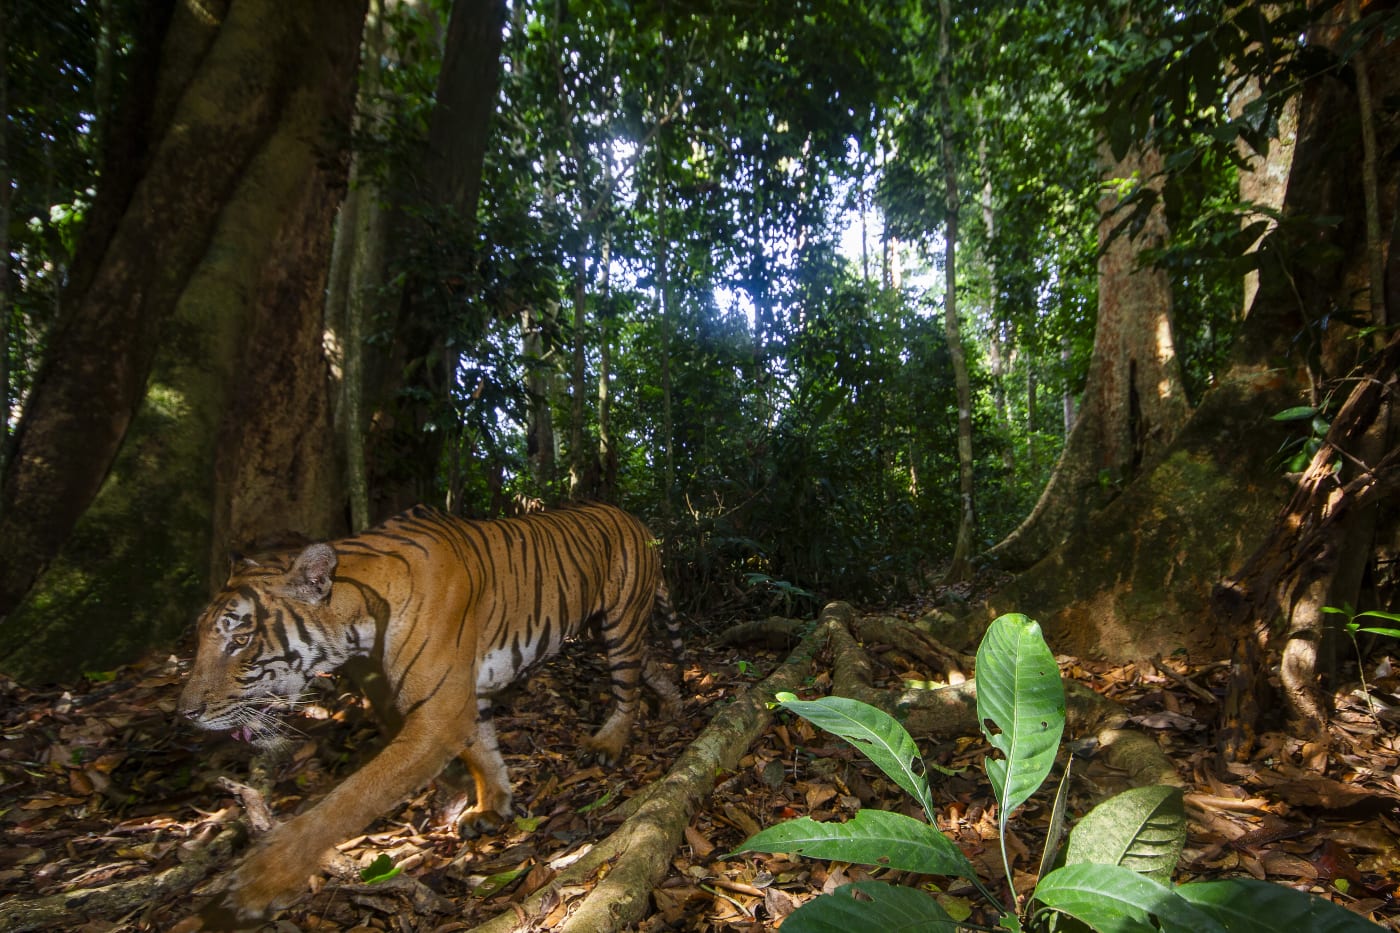 A tiger photographed by Emmanuel Rondeau using a custom built camera trap in Royal Belum State Park, Malaysia